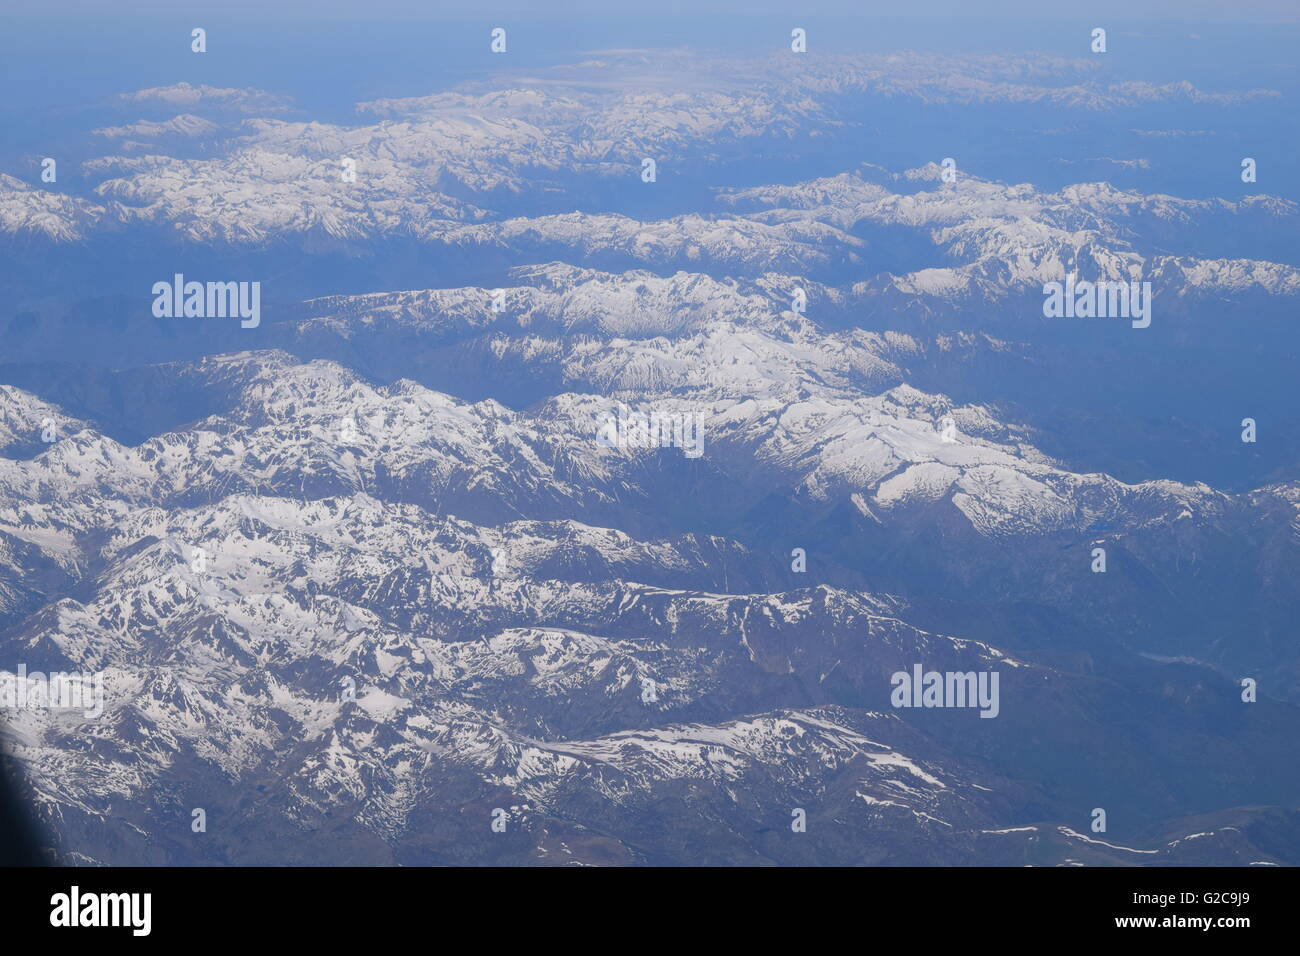 View of snow covered The Alps mountain range from airplane window Stock Photo